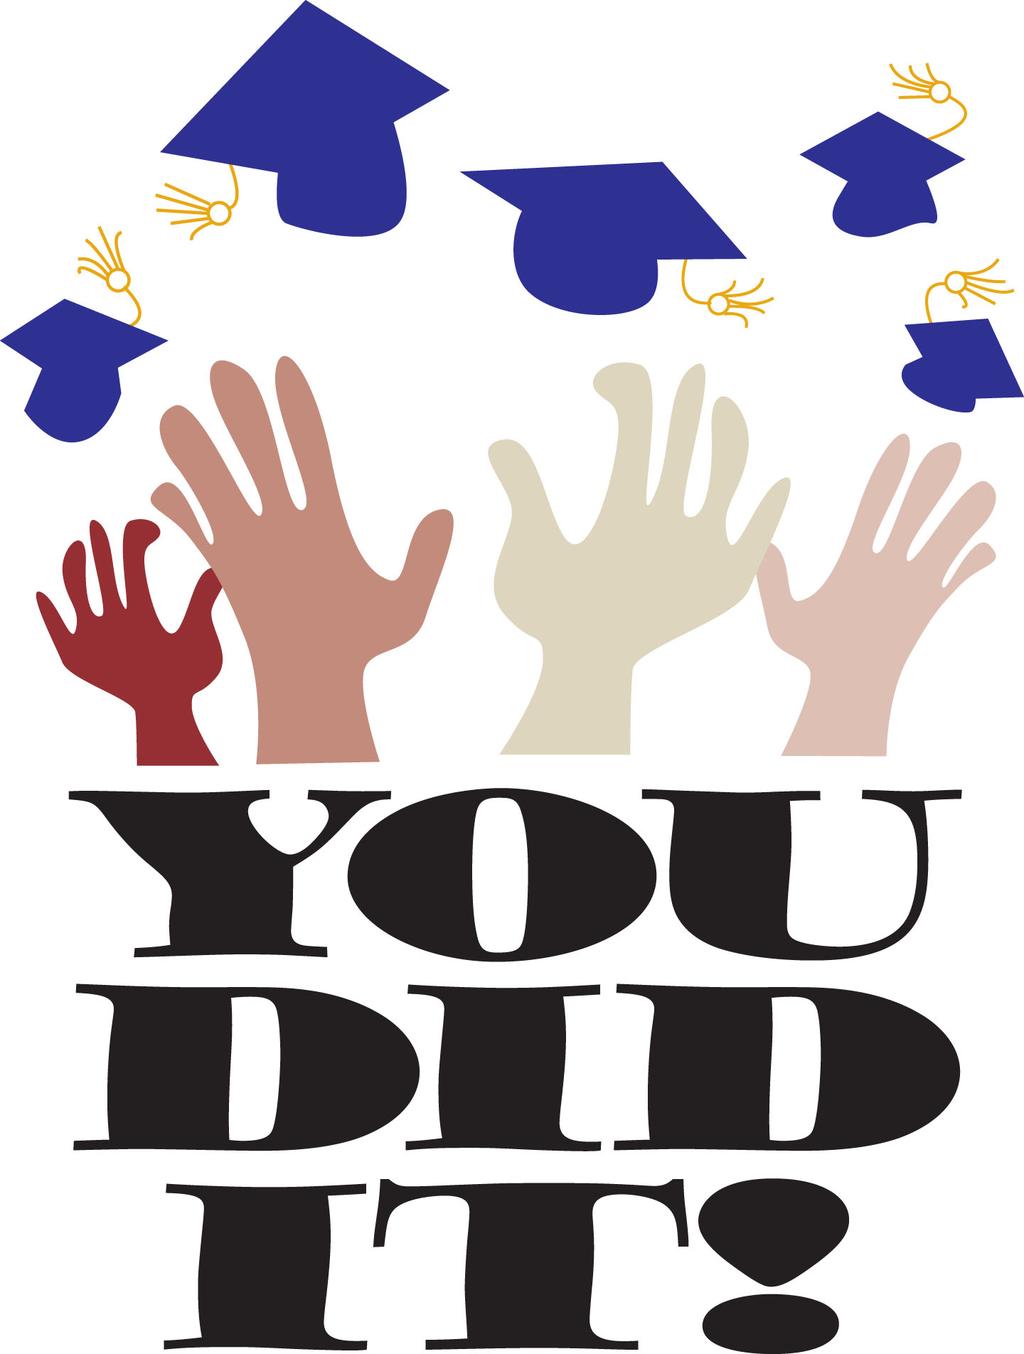 We congratulate the following members of First English Lutheran Church upon their graduation from High School or College: High School Michelle Mondrey: Hanover High School.